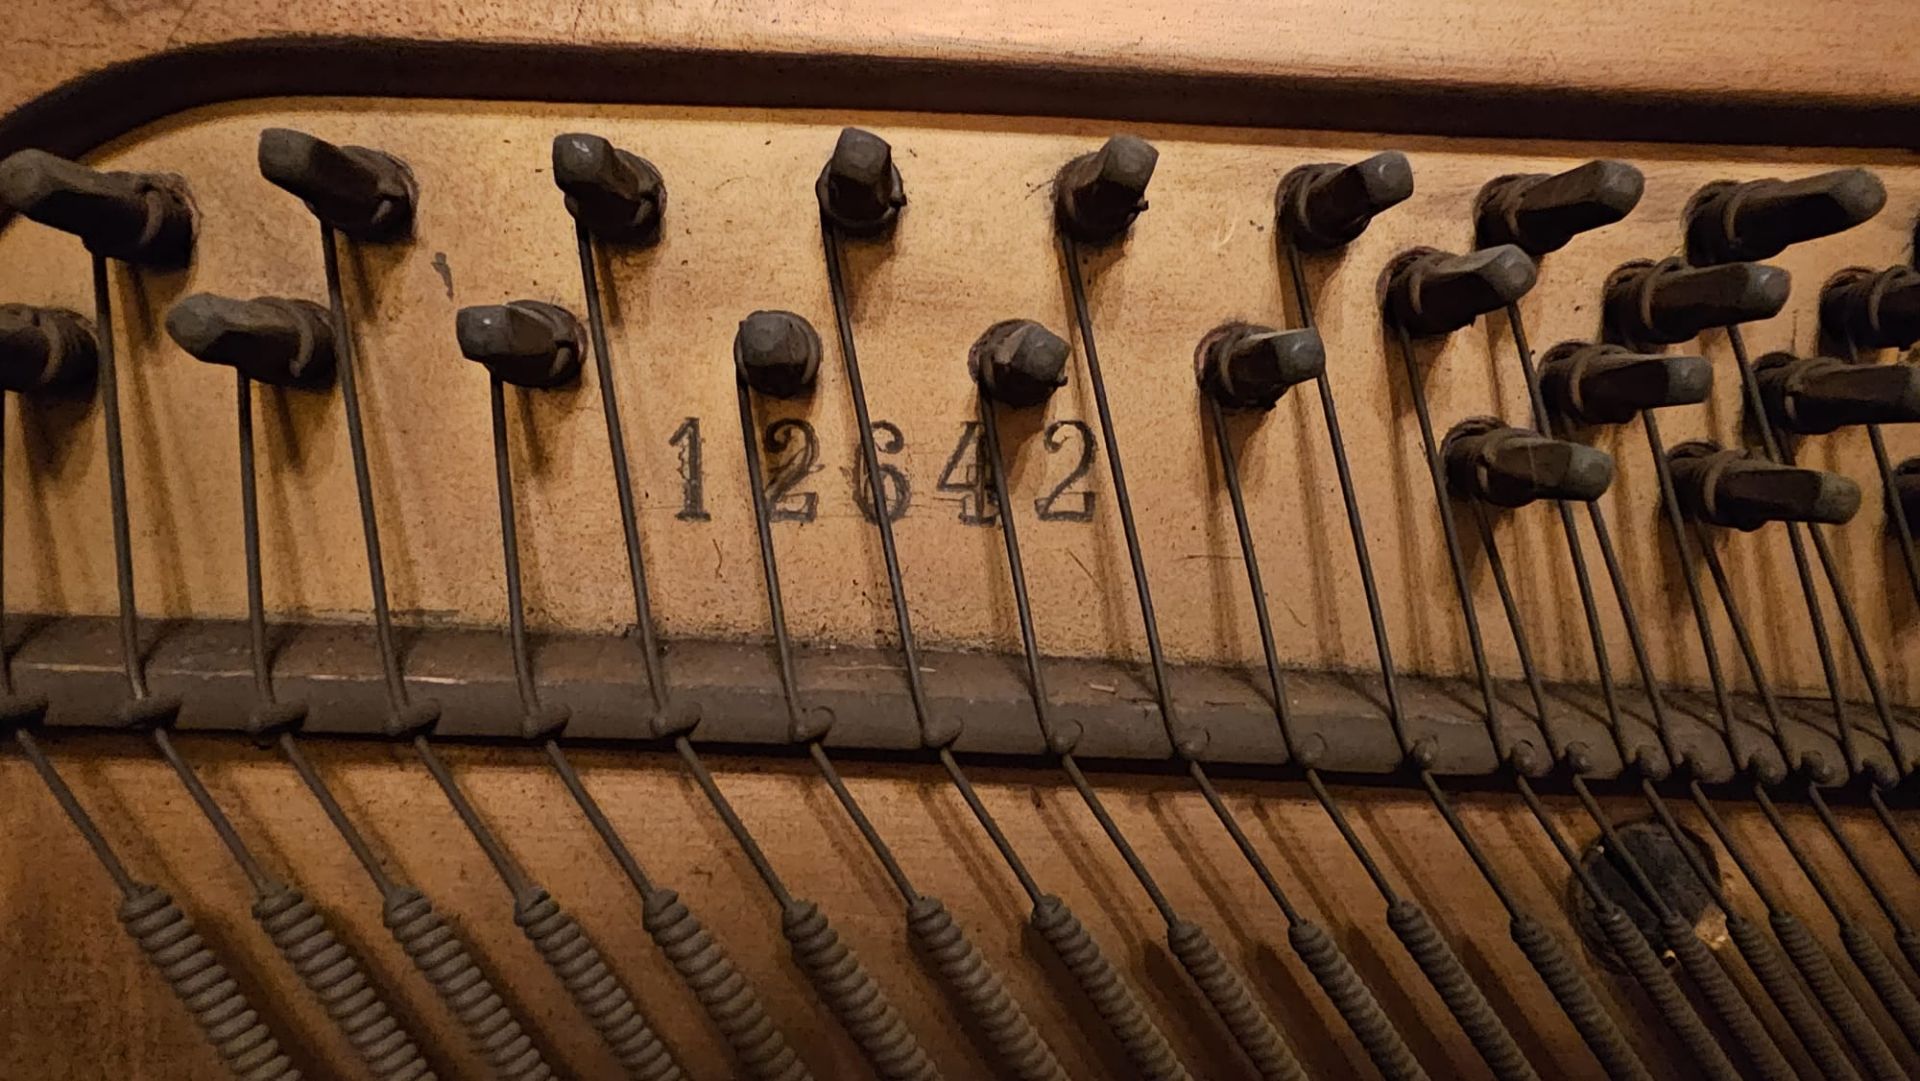 Weissbrod Upright Piano with 12642 Stamped Inside. Collection in Leeds. NO VAT. - Image 8 of 9